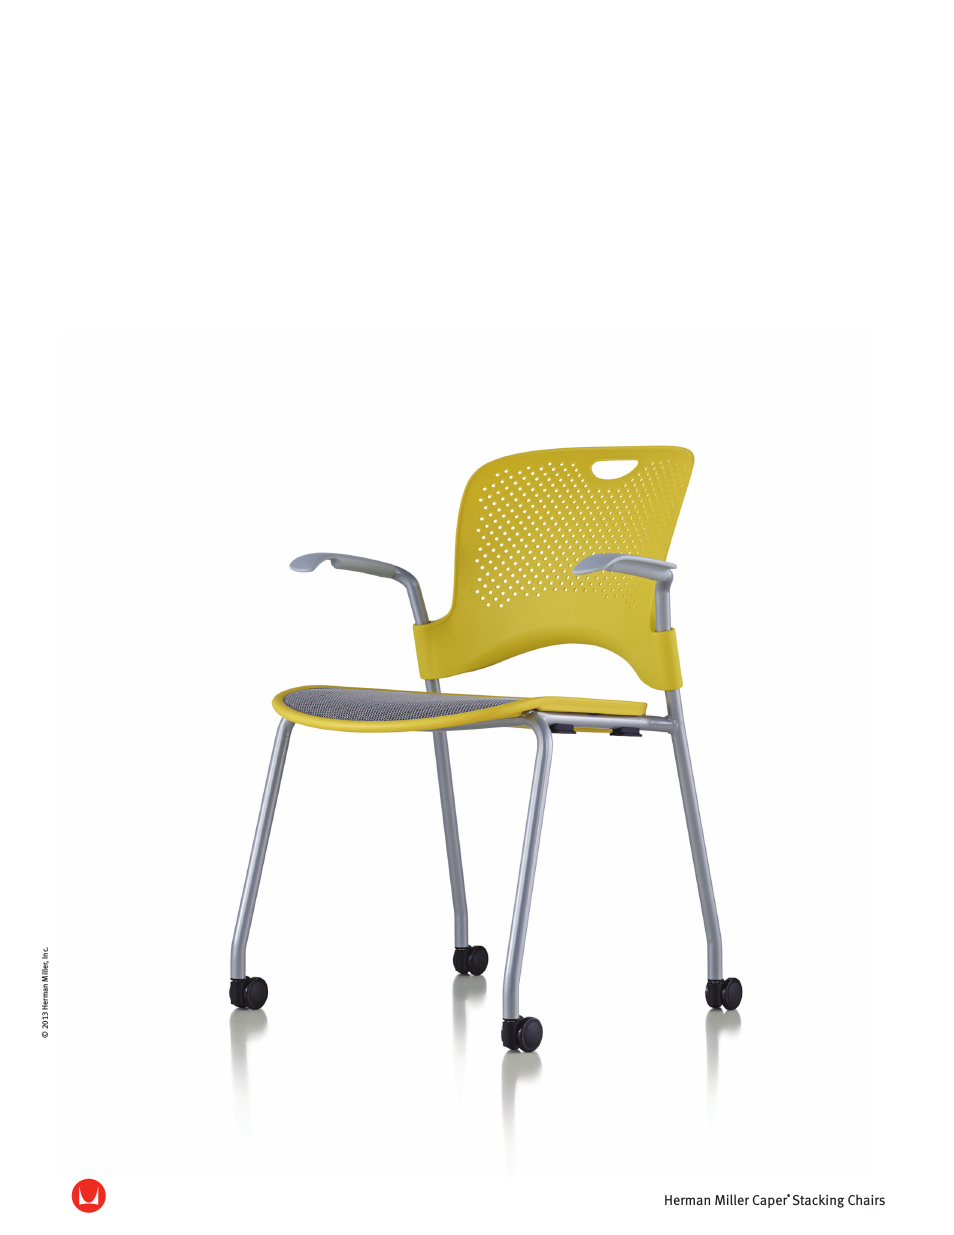 Caper Stacking Chair - Product sheet